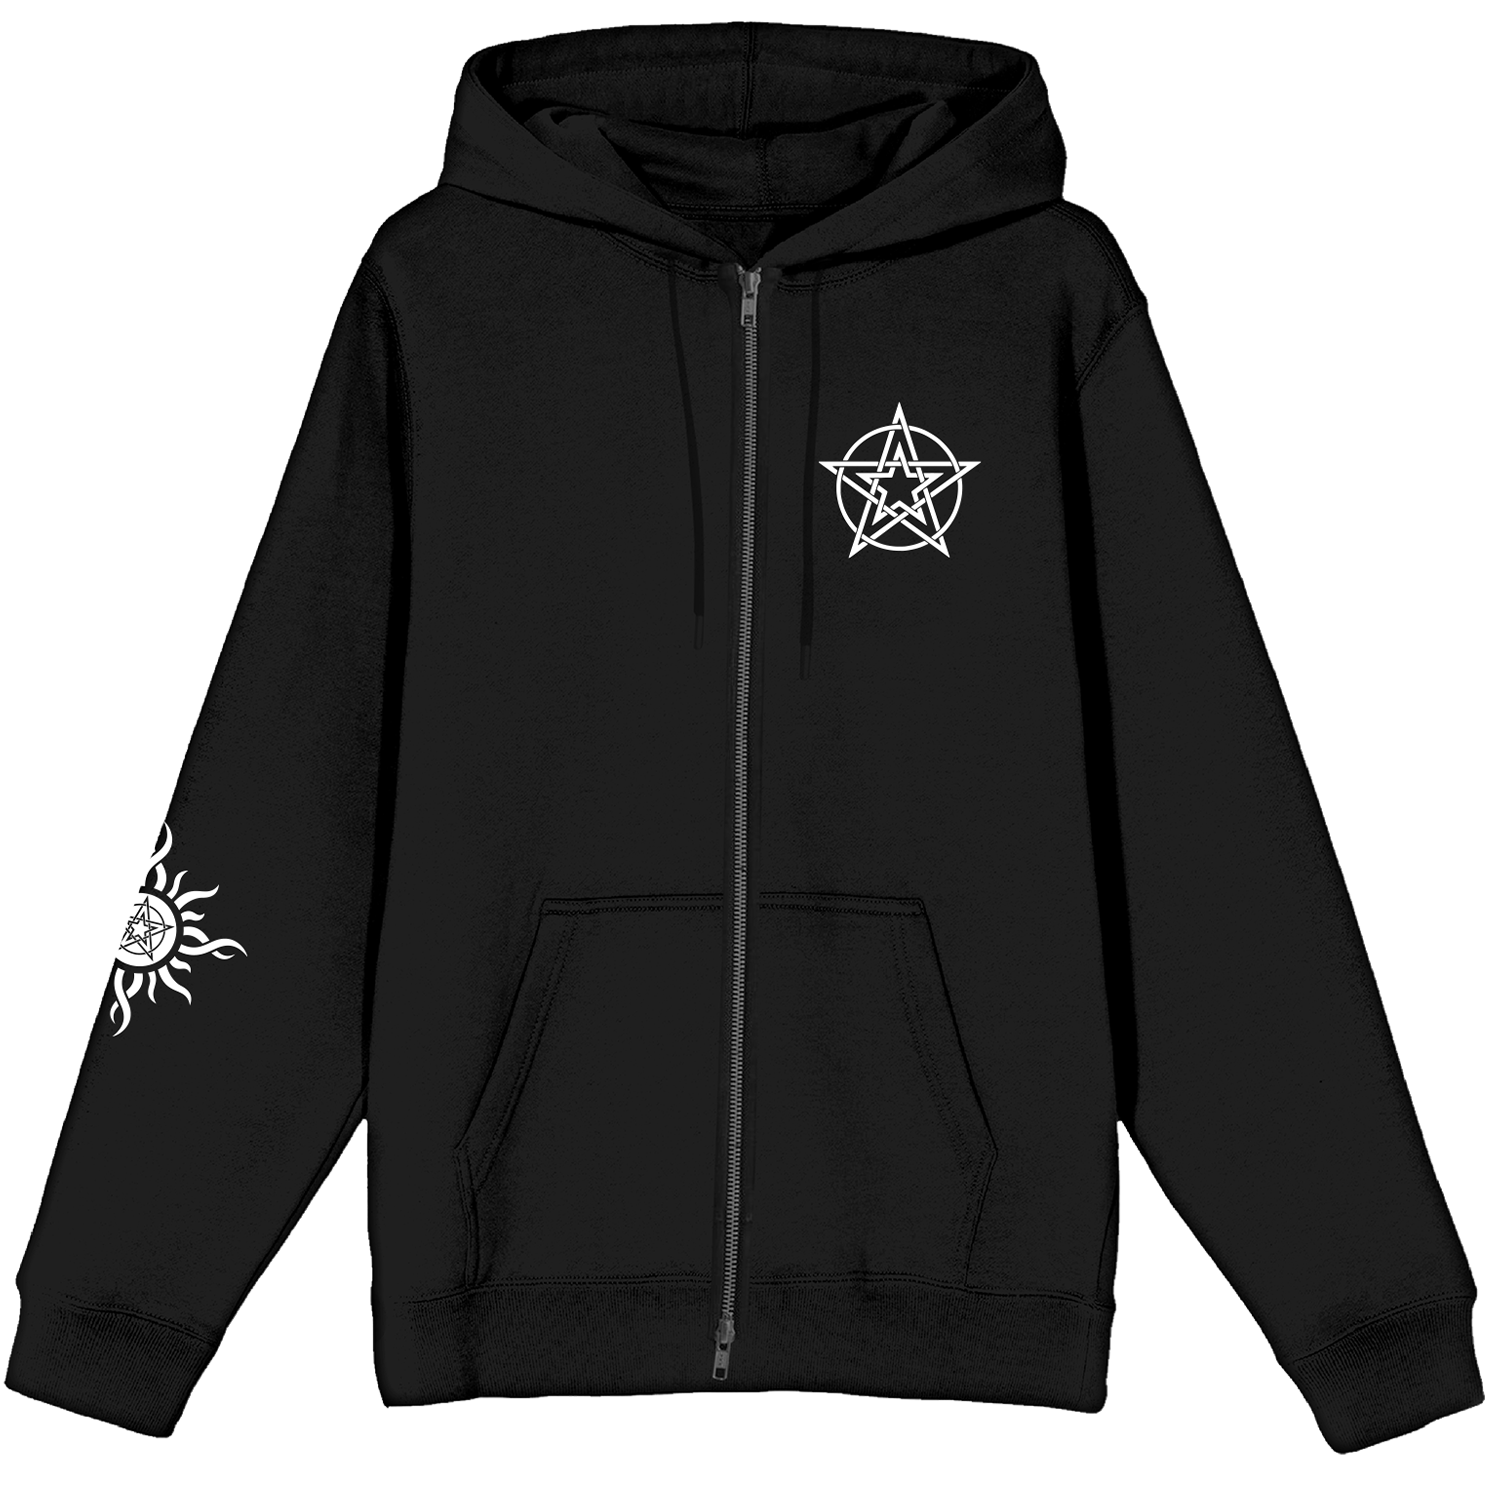 Zip hoodie with star printed on the front and sun logo printed on the sleeve